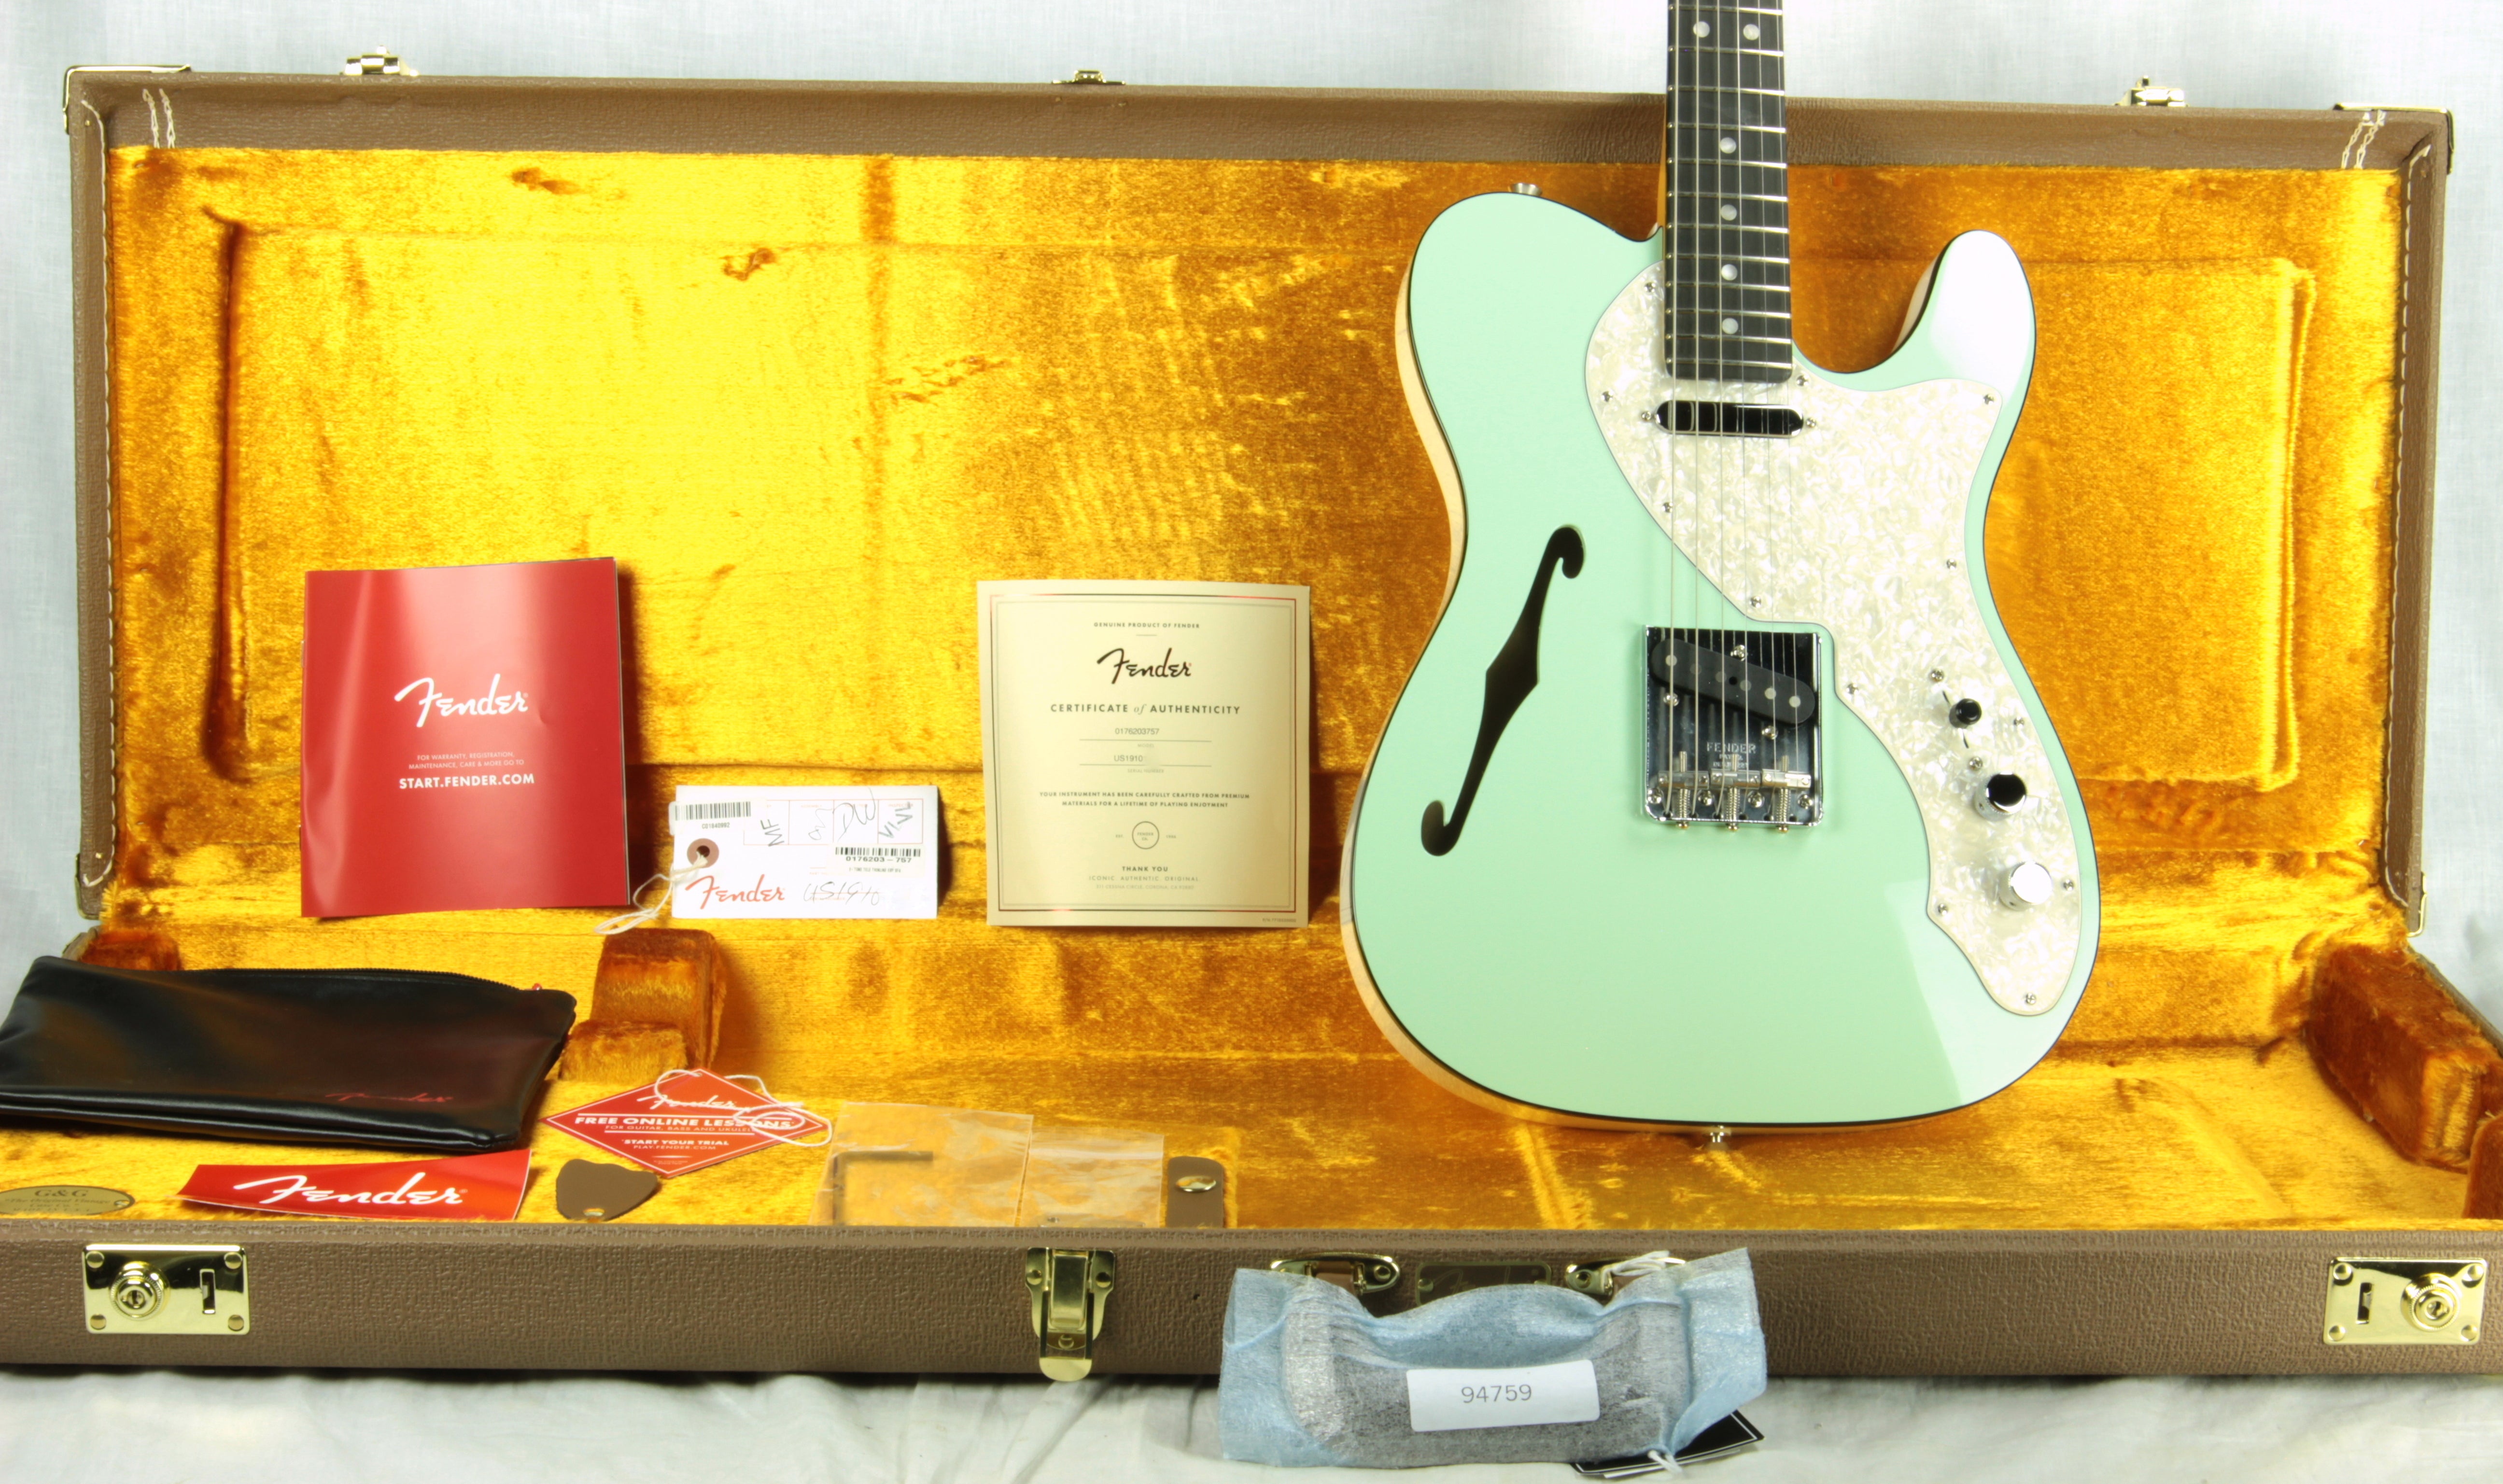 *SOLD*  2019 Fender LIMITED EDITION American Telecaster Thinline USA Two-Tone Tele Seafoam Green Custom Shop Nocaster Pups!